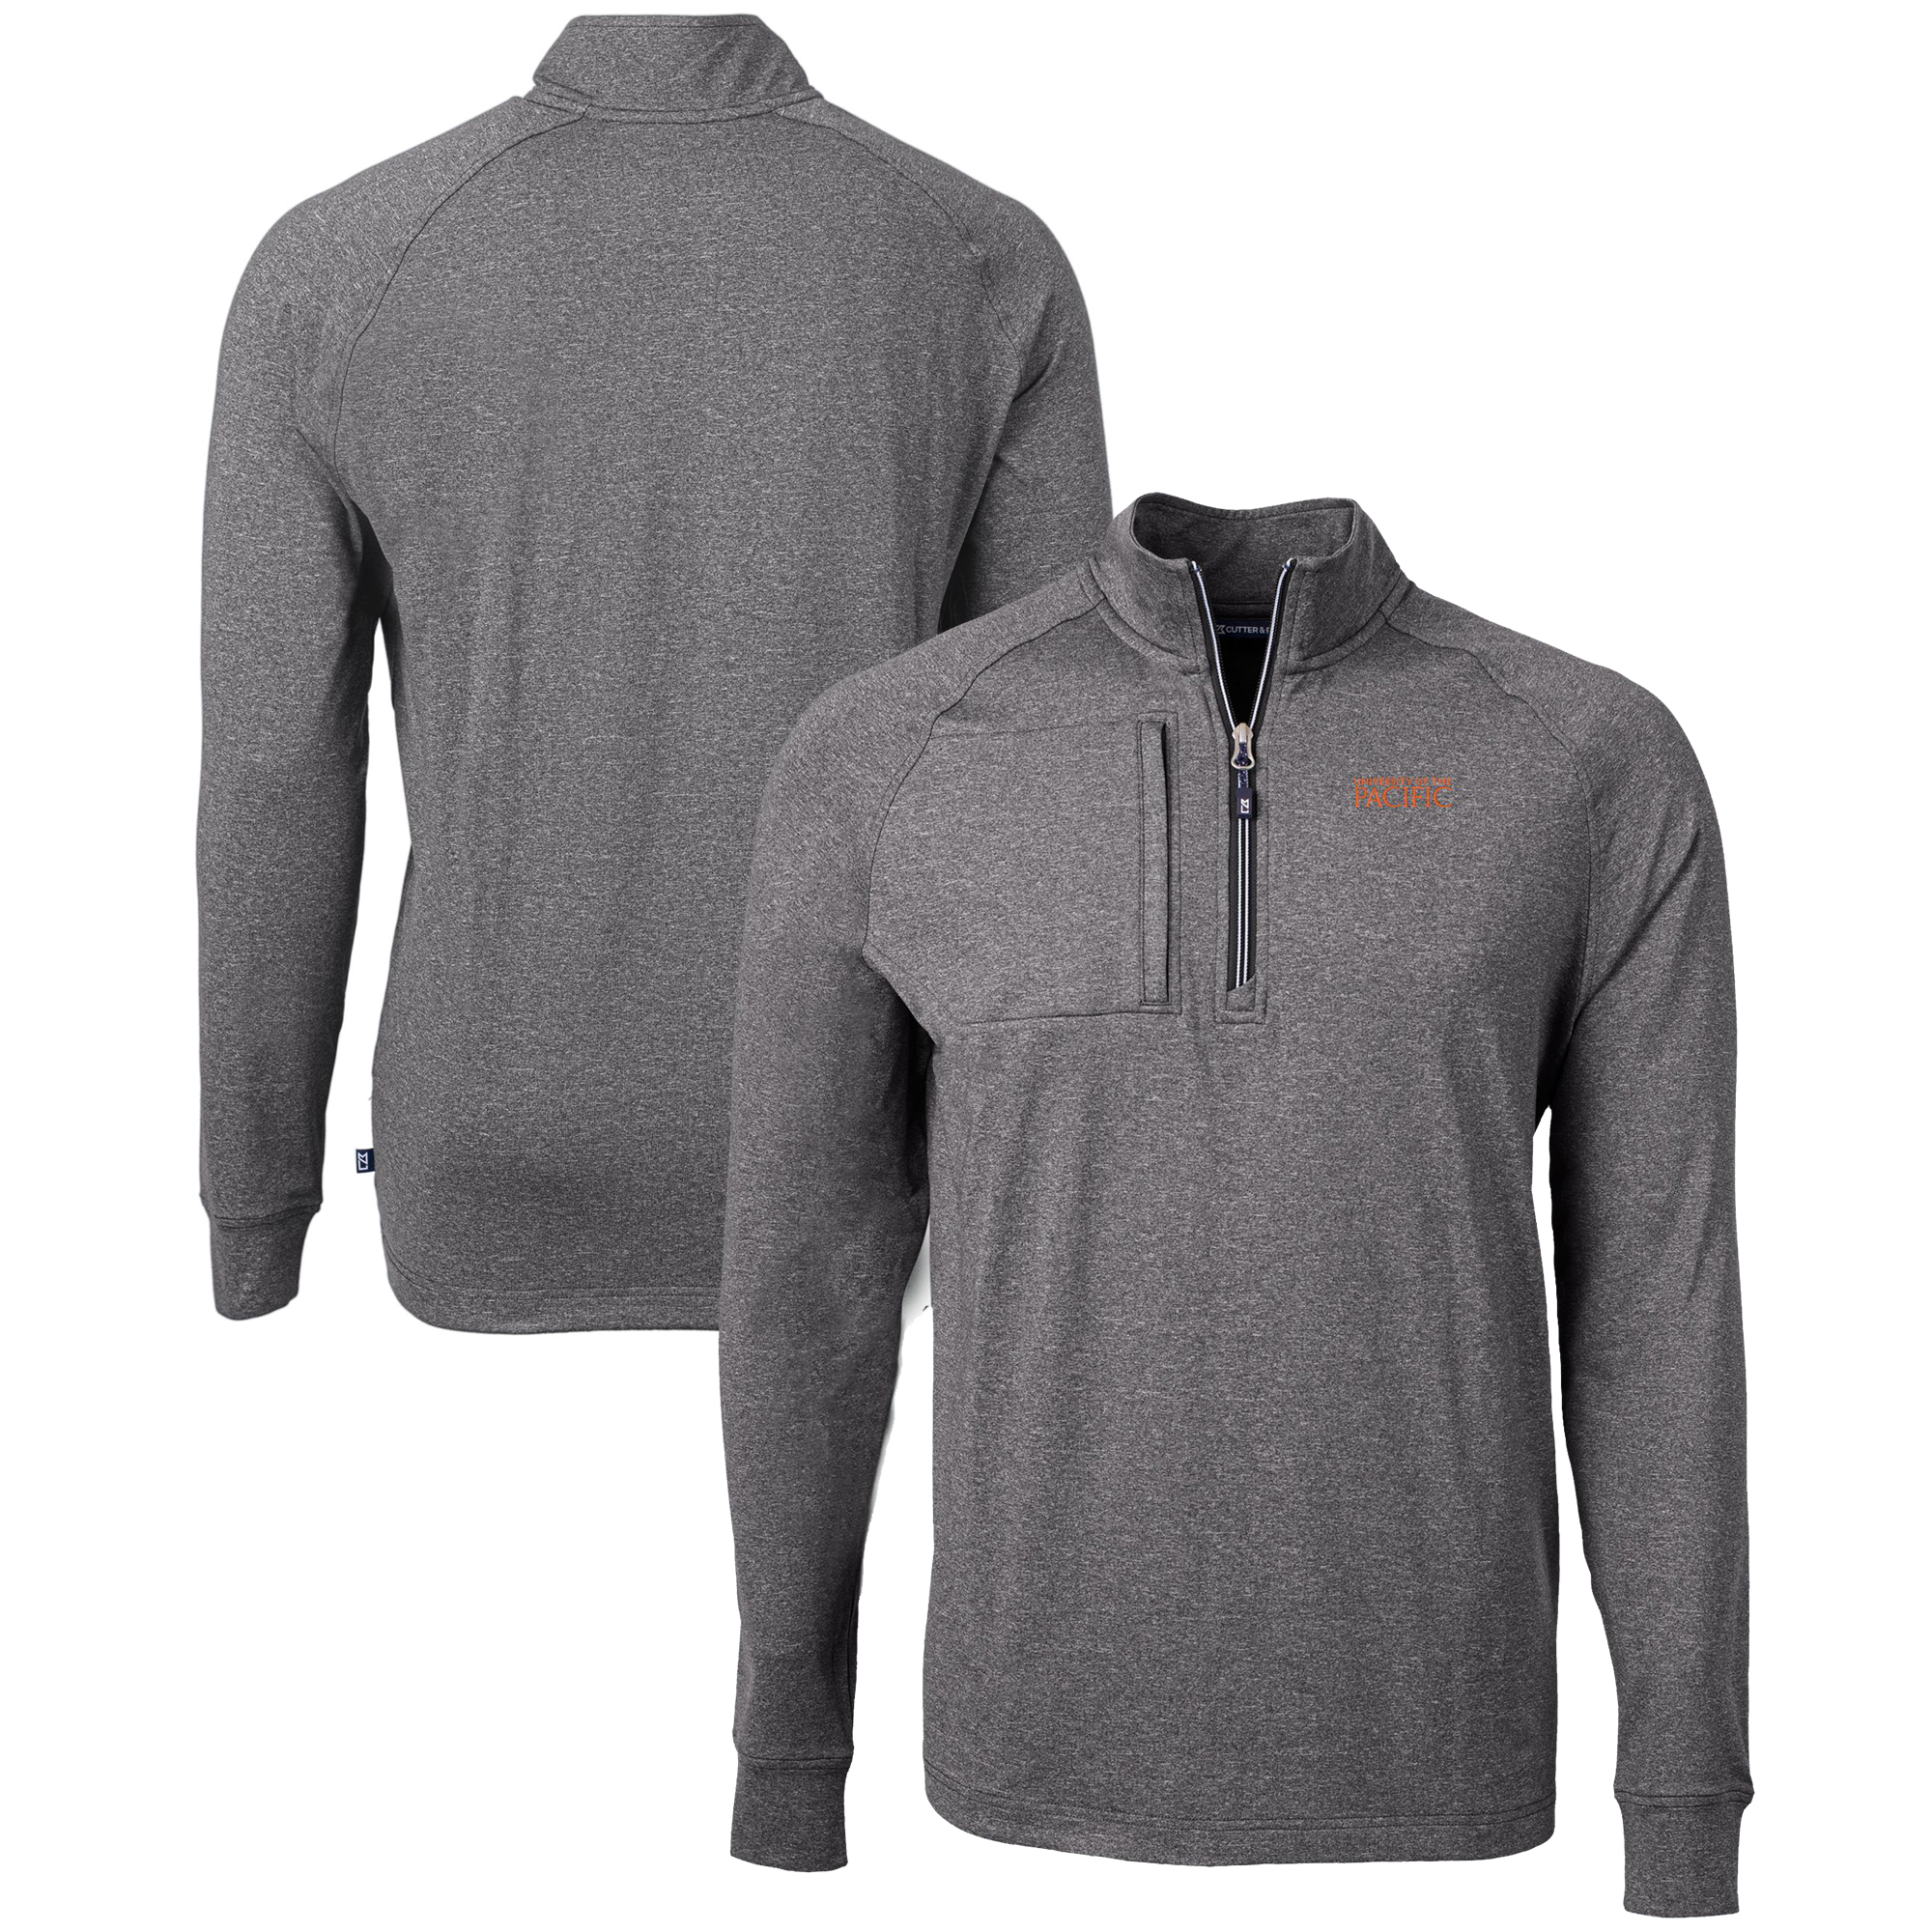 Men's Cutter & Buck  Heather Black Pacific Tigers Big & Tall Adapt Eco Knit Quarter-Zip Pullover Top - image 1 of 3